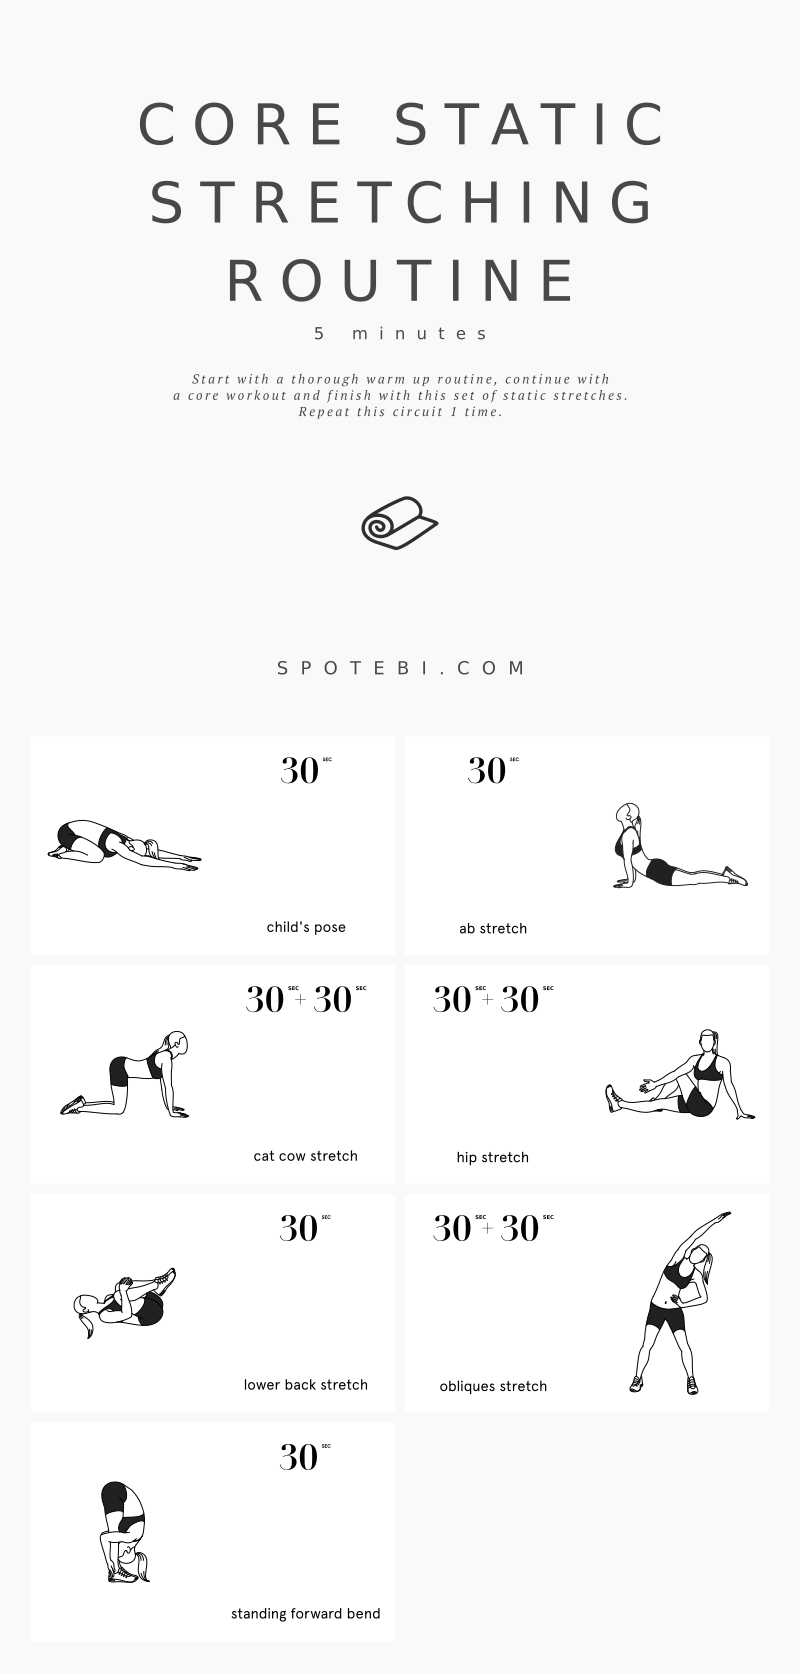 Finish your core workout with this static stretching routine. Abs, obliques, and lower back stretches to increase your flexibility and release all tension. Start the timer, play the music, and relax! https://www.spotebi.com/workout-routines/core-static-stretching-exercises/